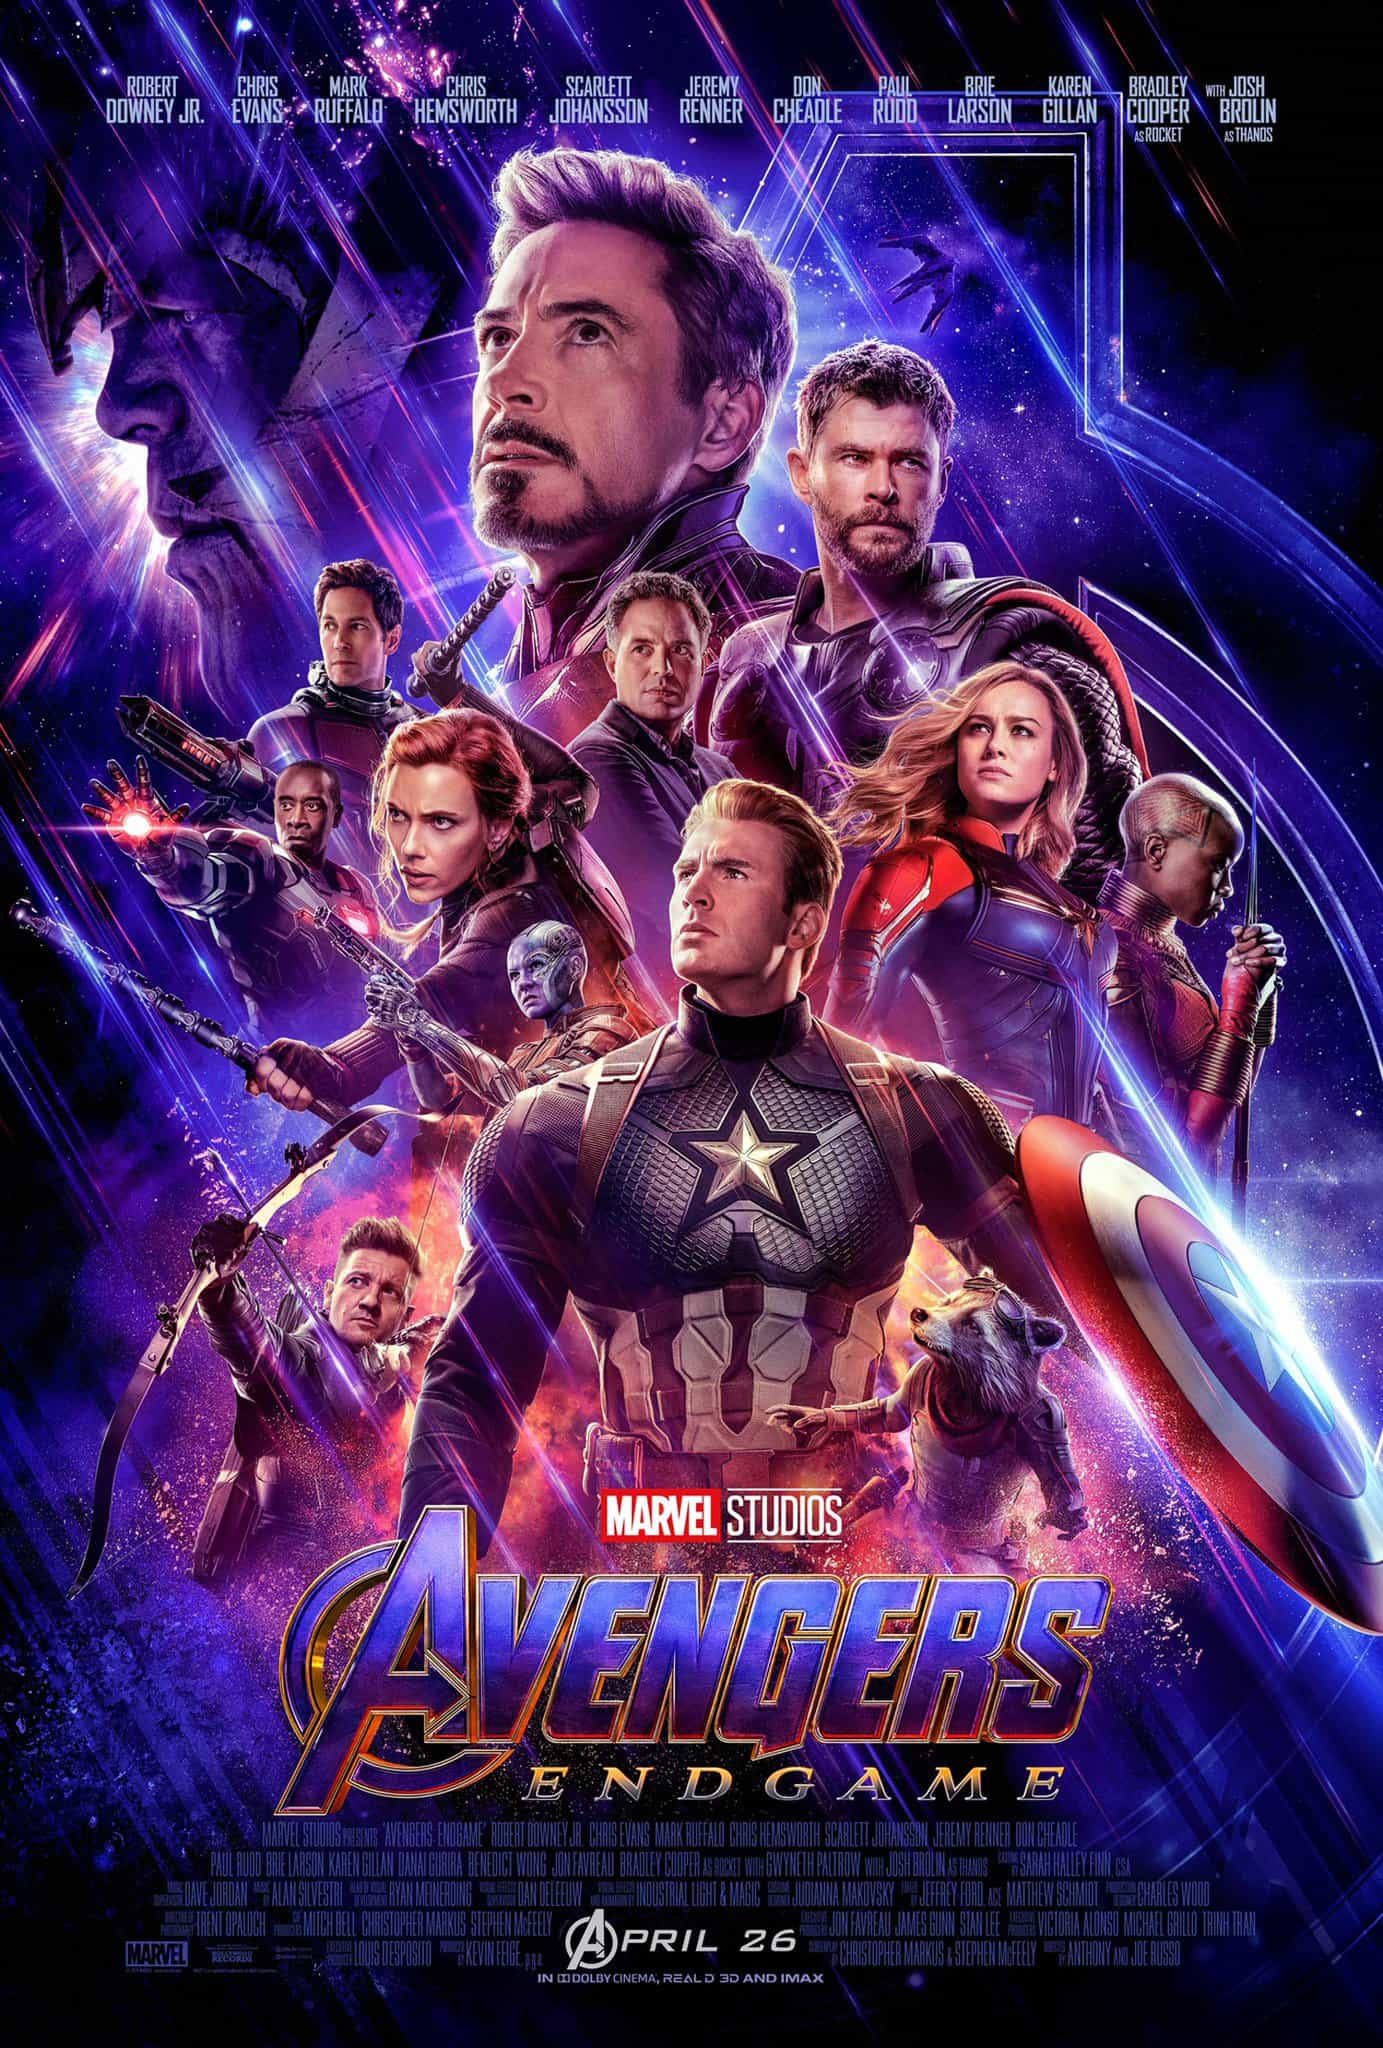 World Box Office Analysis Weekend 10th - 12th Mat 2019:  Avengers Endgame remains at the top despite still competition Pikachu